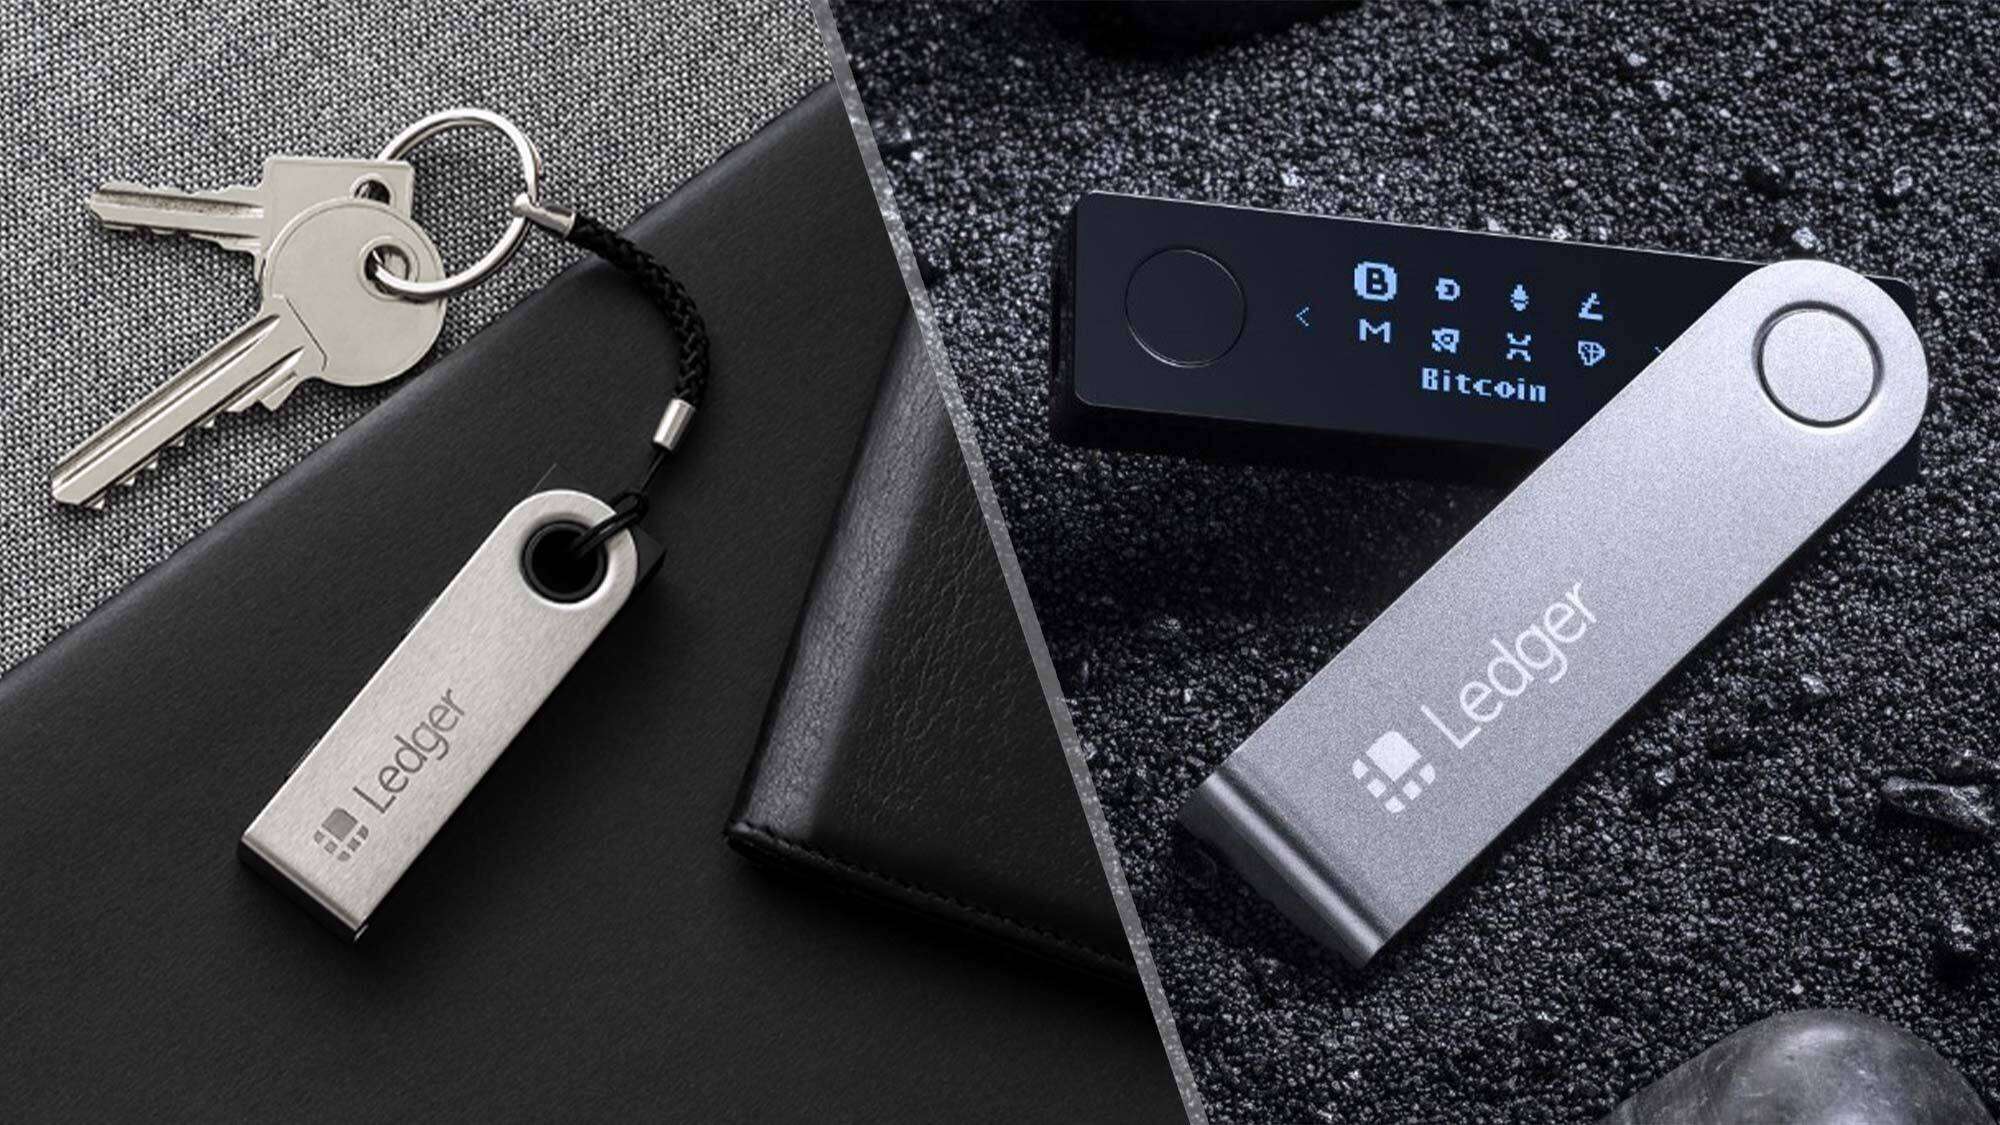 What Is A Ledger Crypto